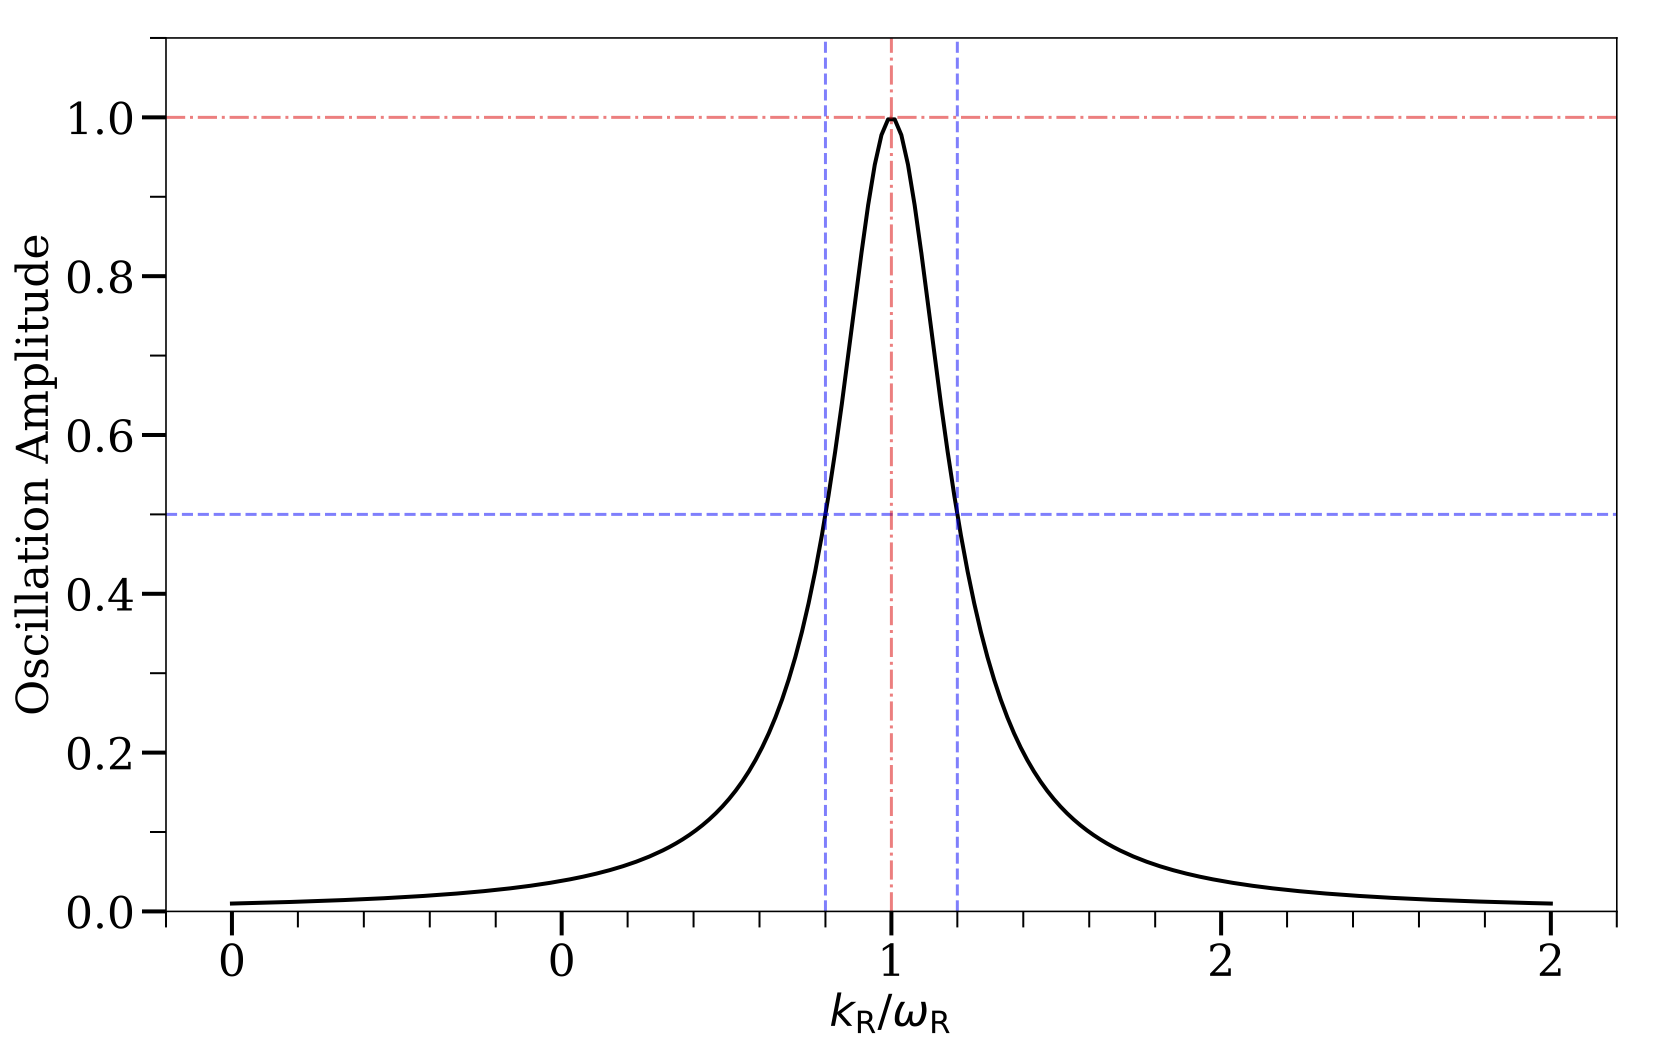 The amplitude of Rabi oscillations as a function of the frequency of the external driving field $k_\RR$. The maximum amplitude occurs at $k_\RR/\omega_\RR=1$. The resonance width is defined to be the difference of $k_\RR$ at which the amplitudes are 1/2.